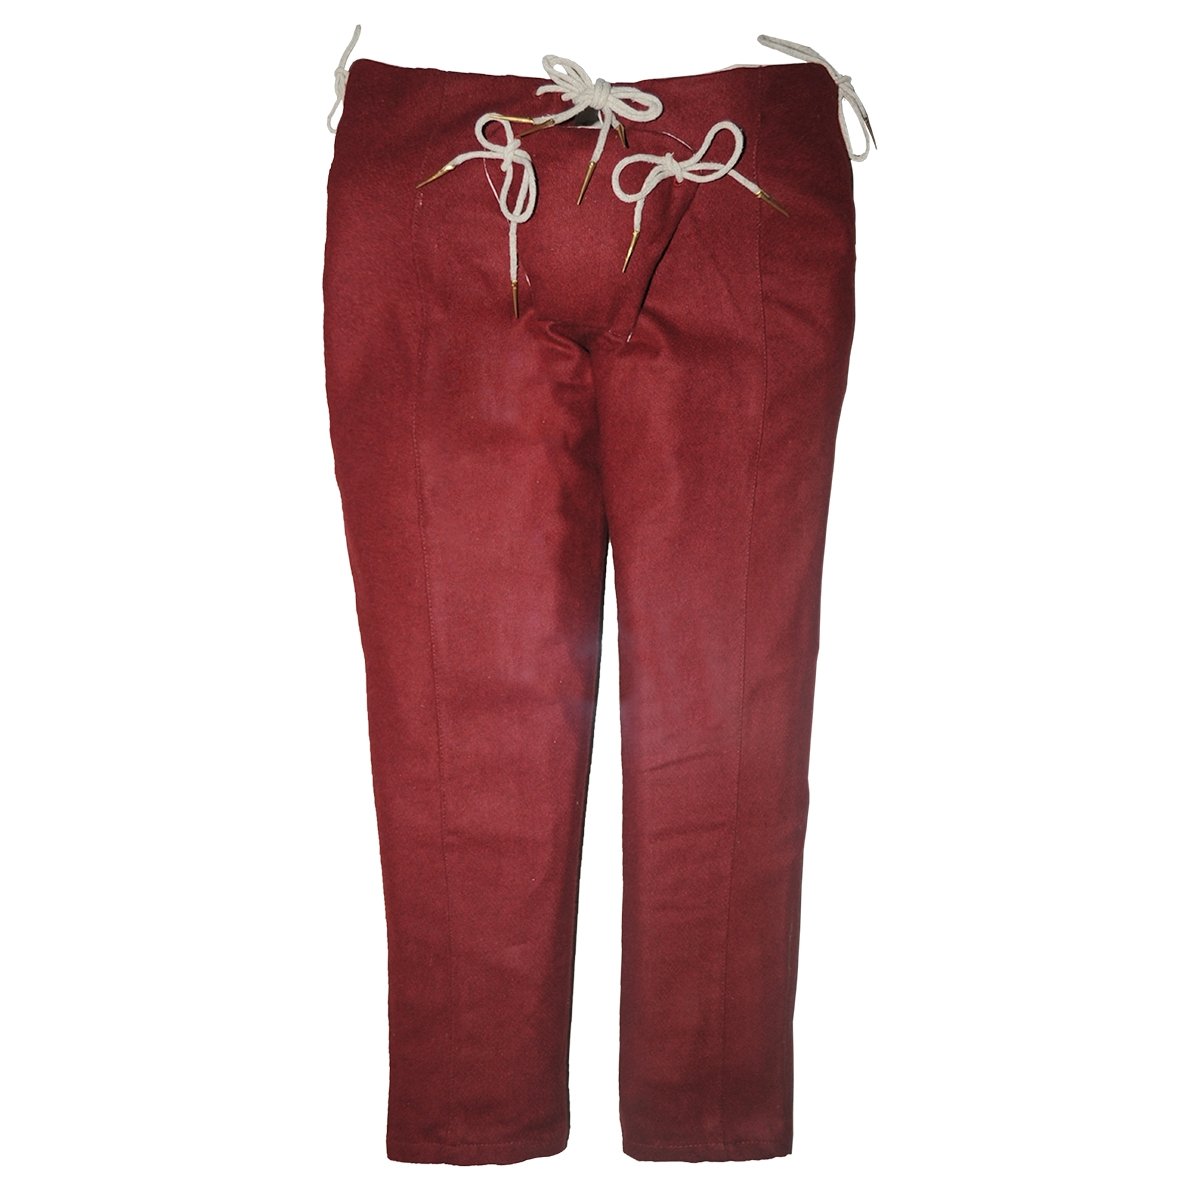 Man's 15th C. Trousers - Maroon, Size XL